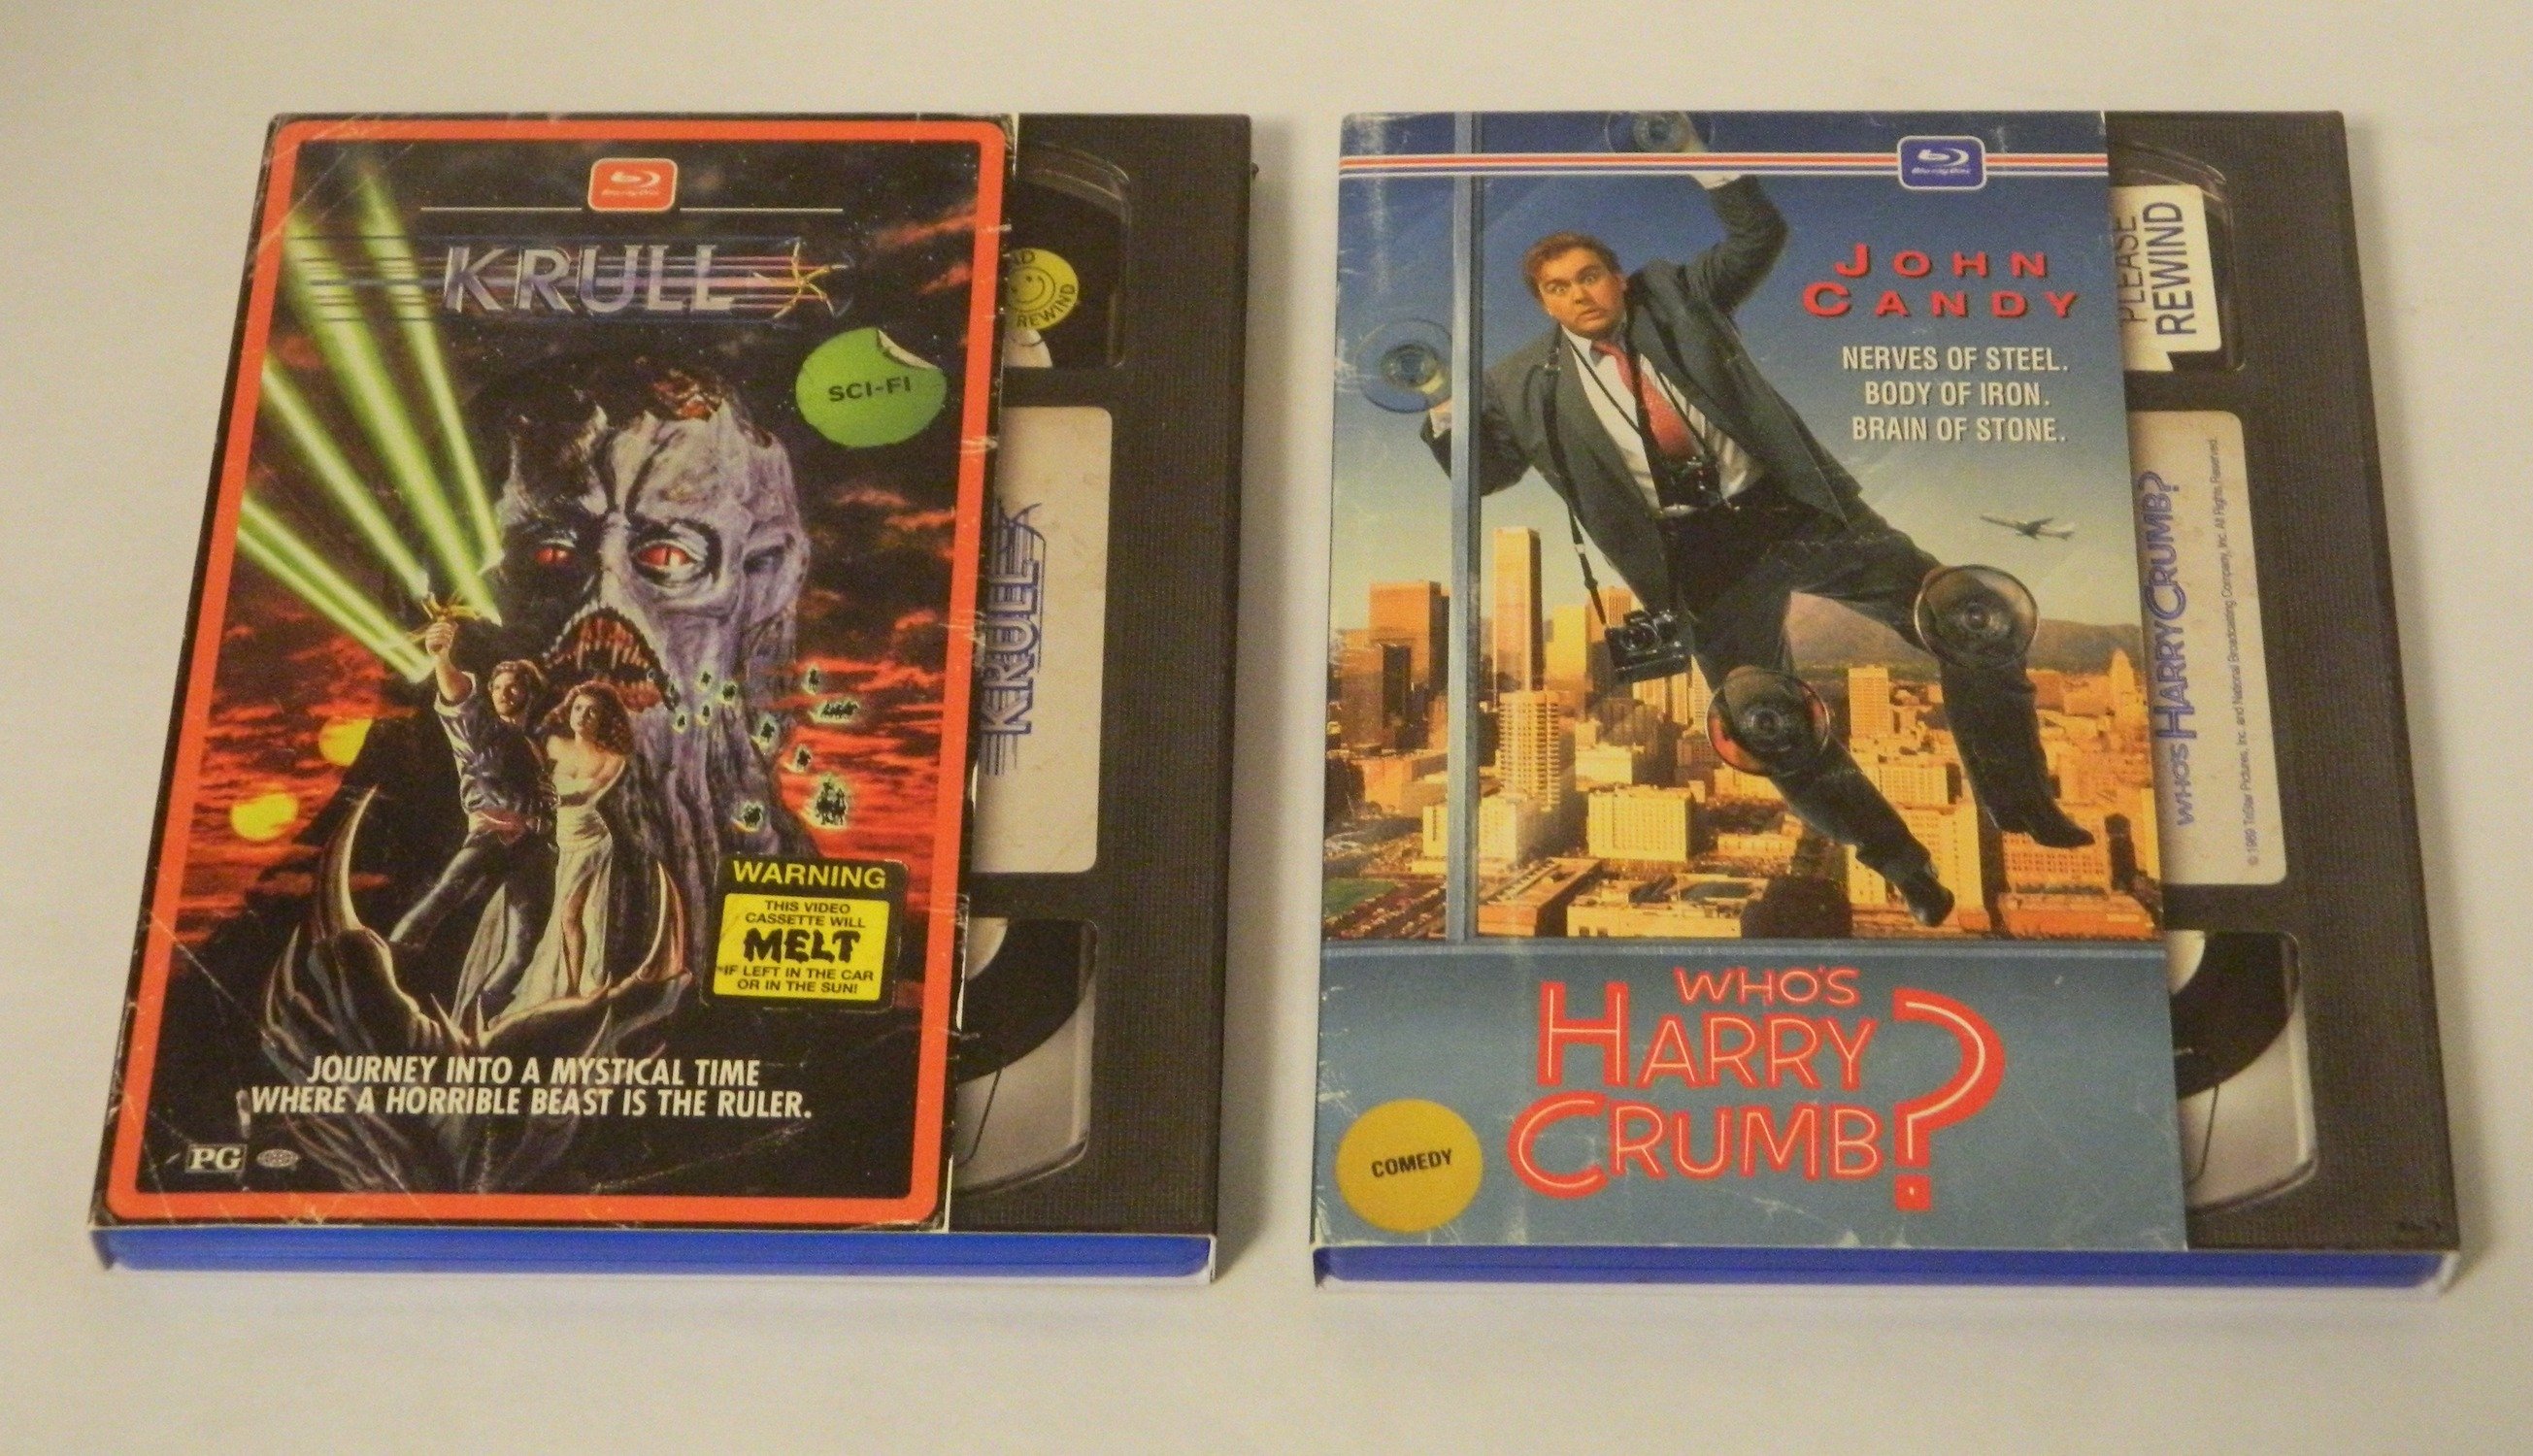 Mill Creek Entertainment Retro VHS Cover Art Blu-ray Reviews (Who’s Harry Crumb? and Krull)